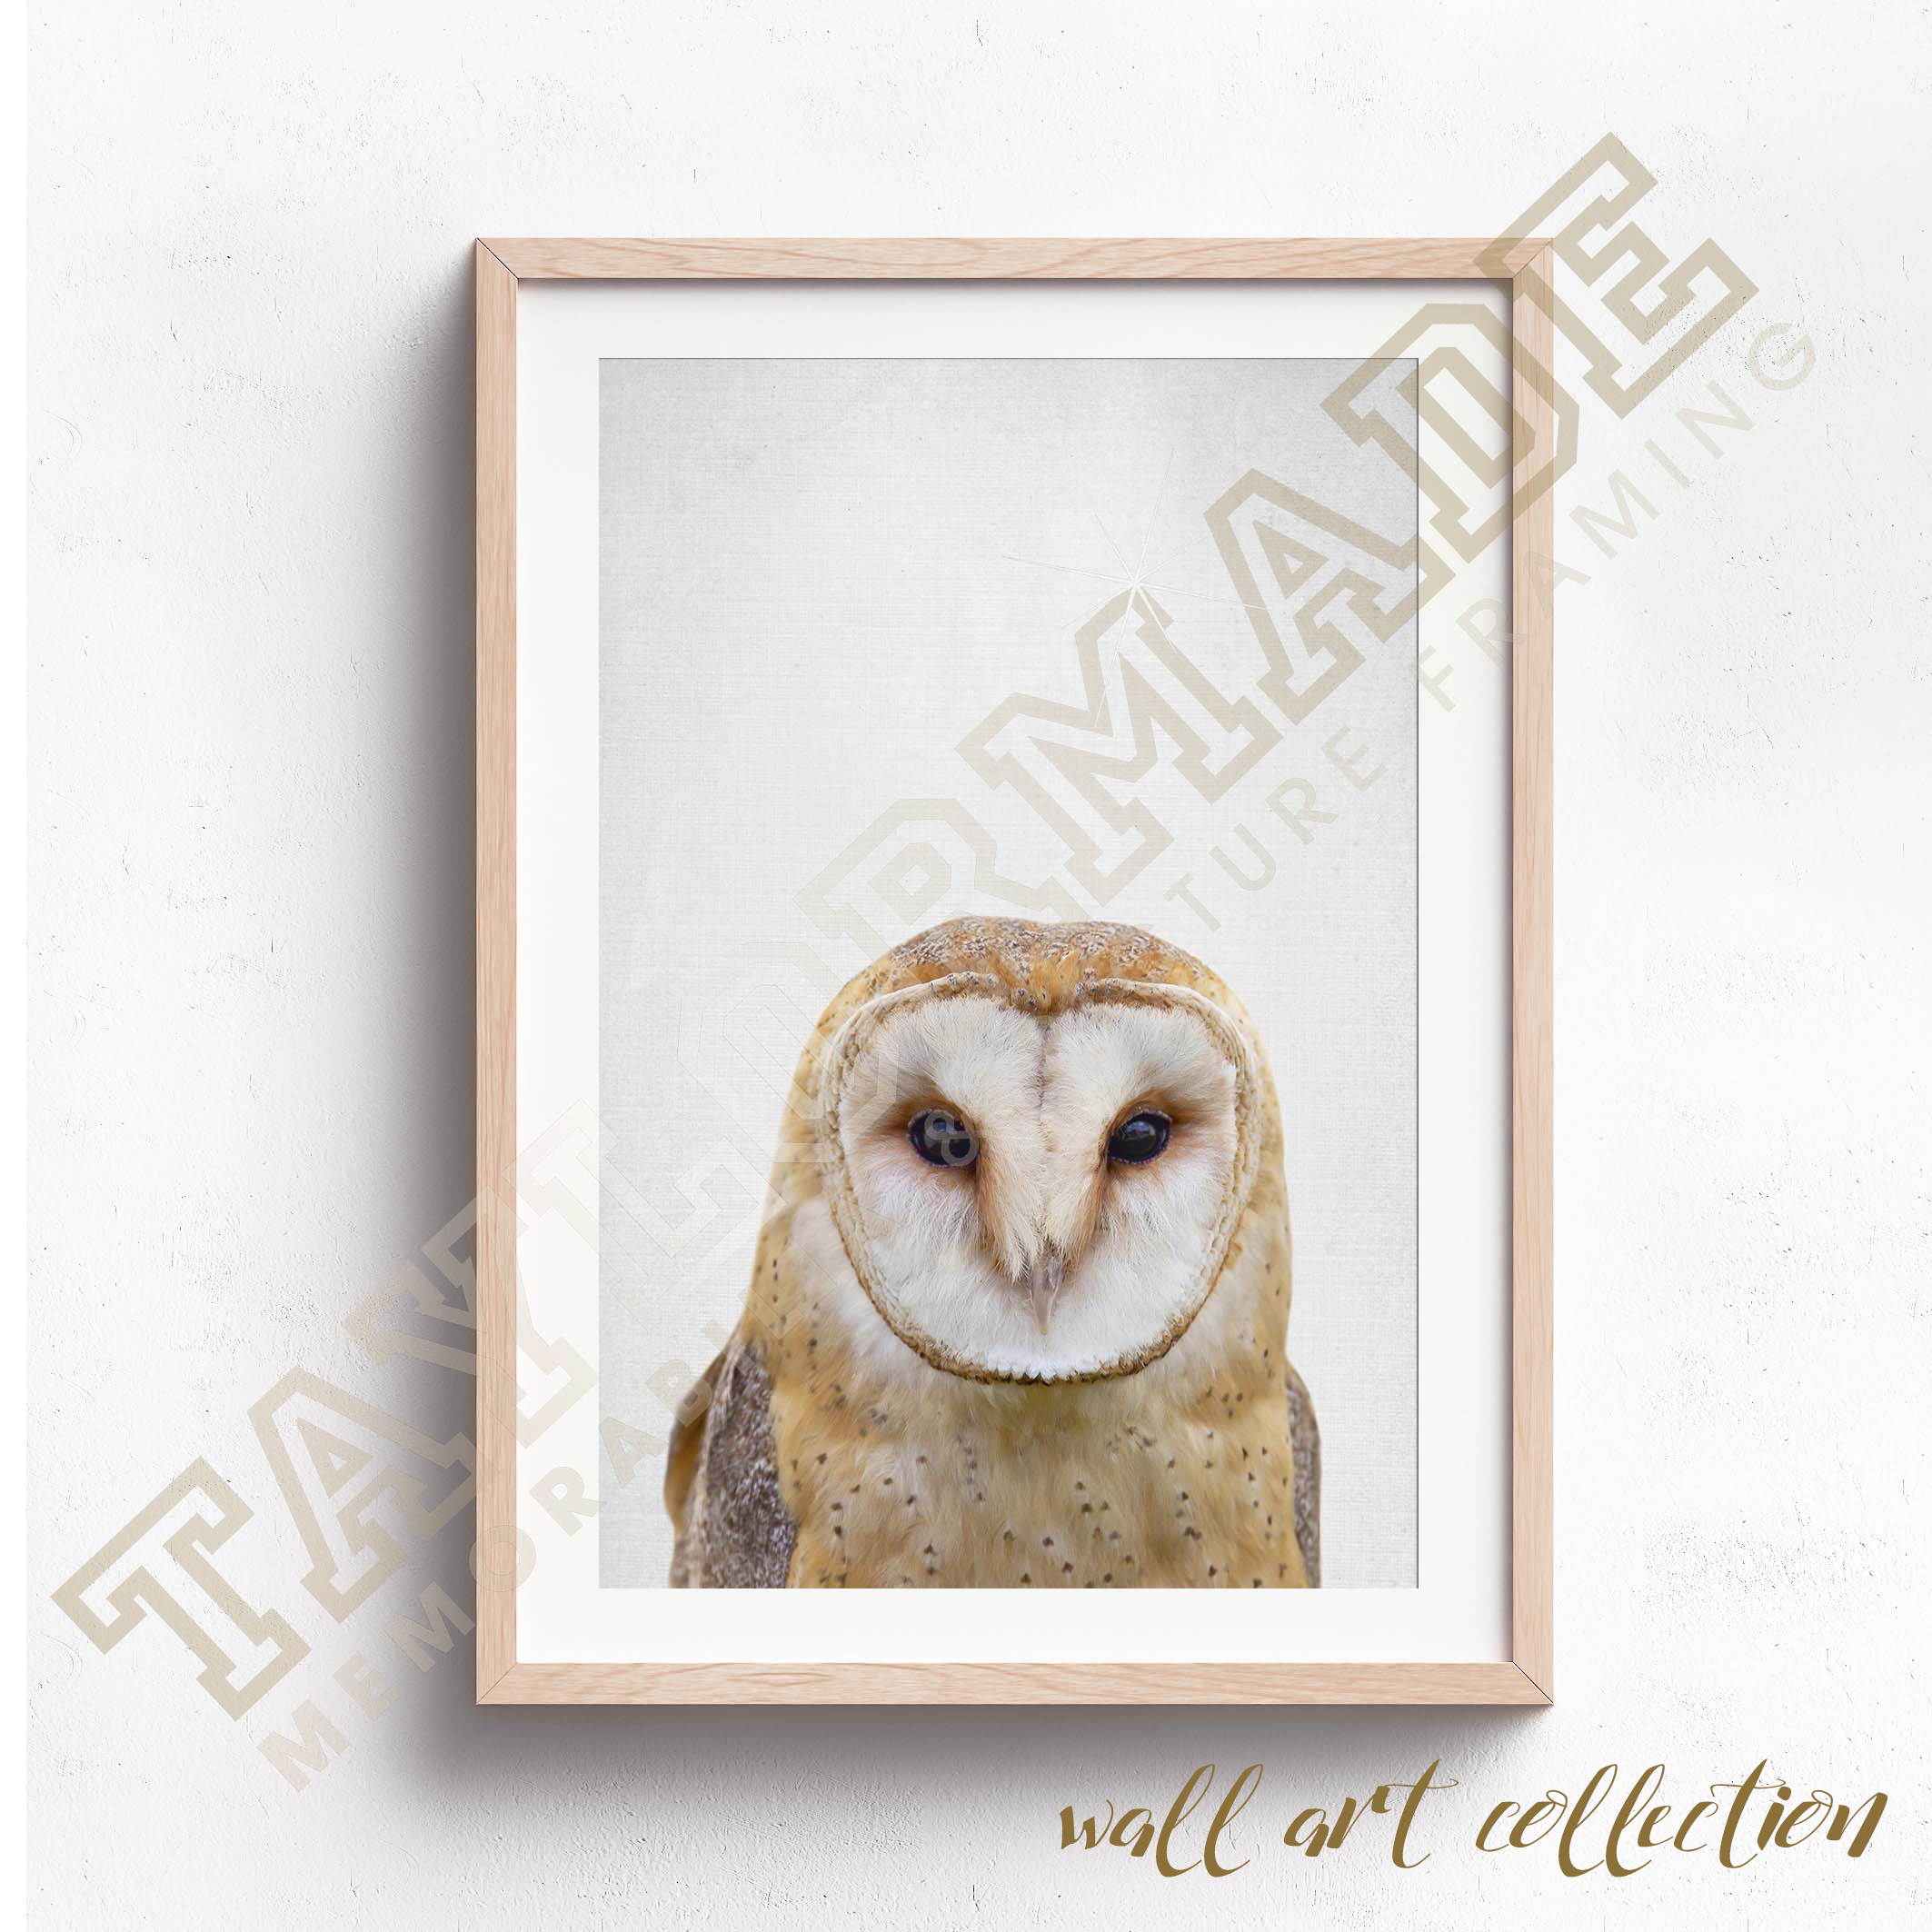 Wall Art Collection – Night Owl